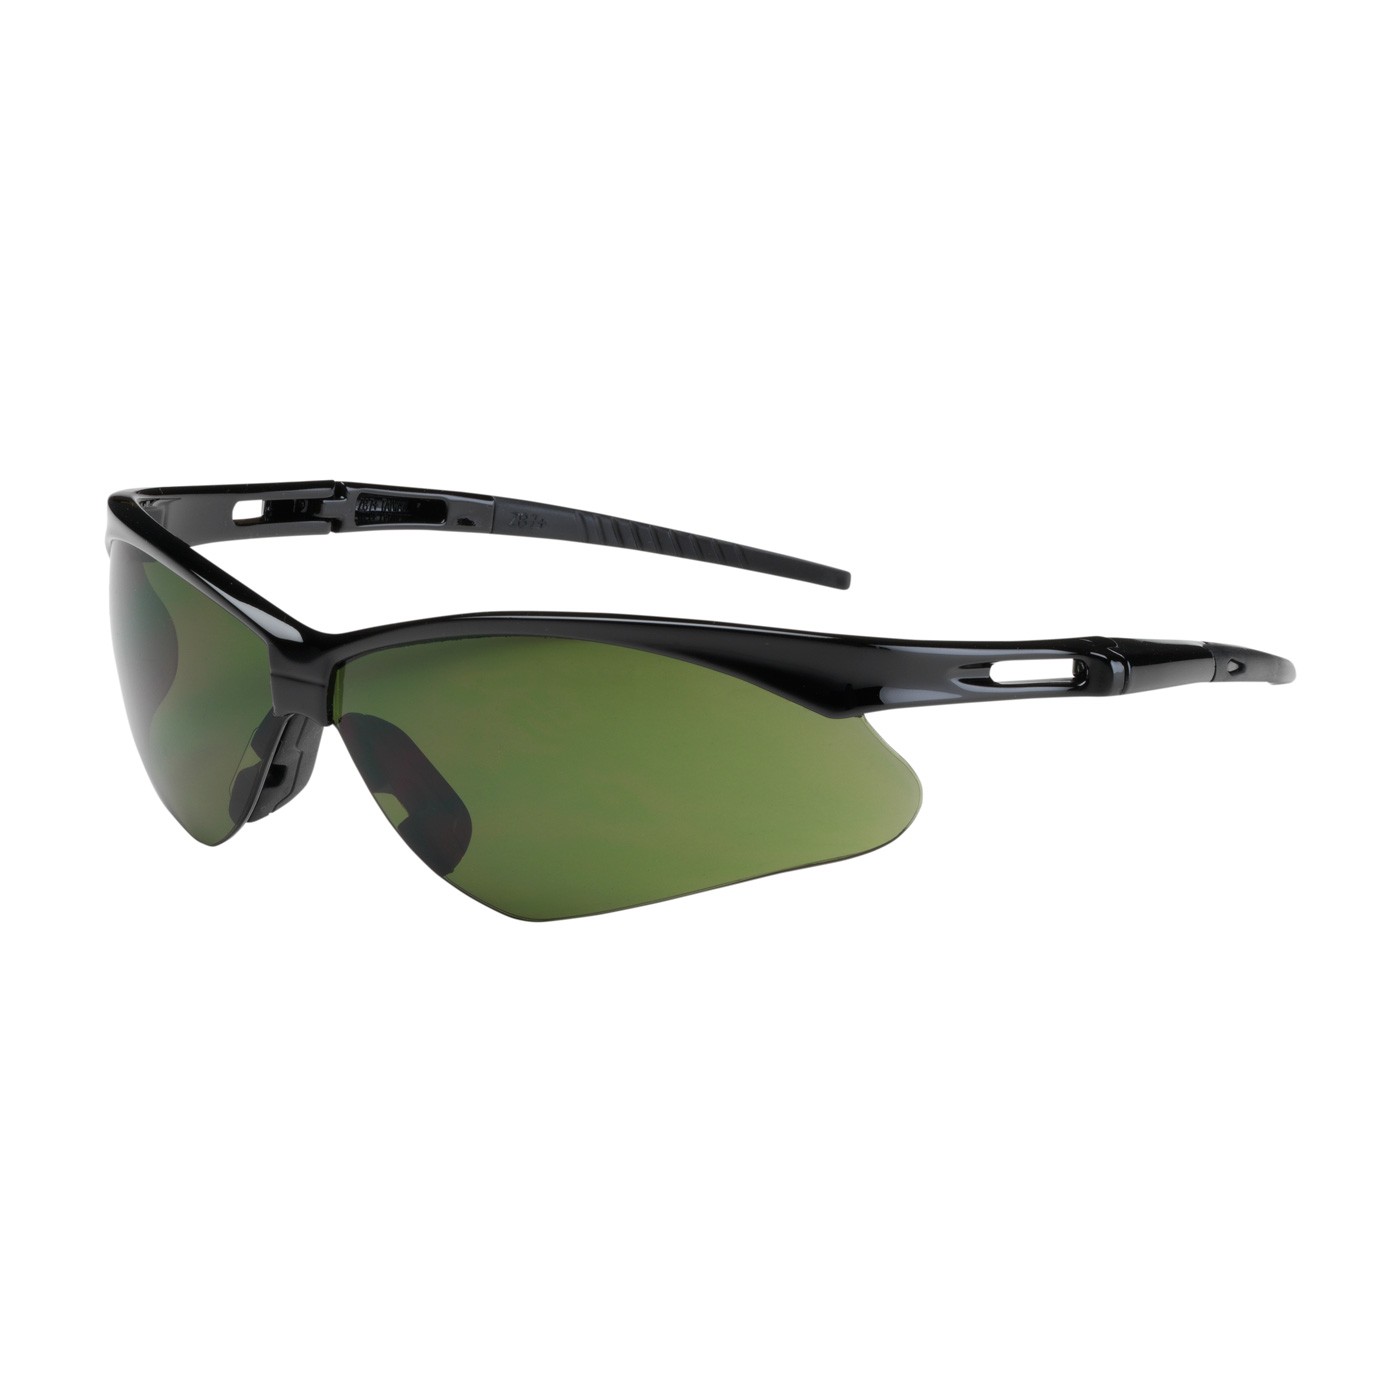 Anser™ Semi-Rimless Safety Glasses with Black Frame, IR Filter Shade 3.0 Lens and Anti-Scratch Coating  (#250-AN-10118)